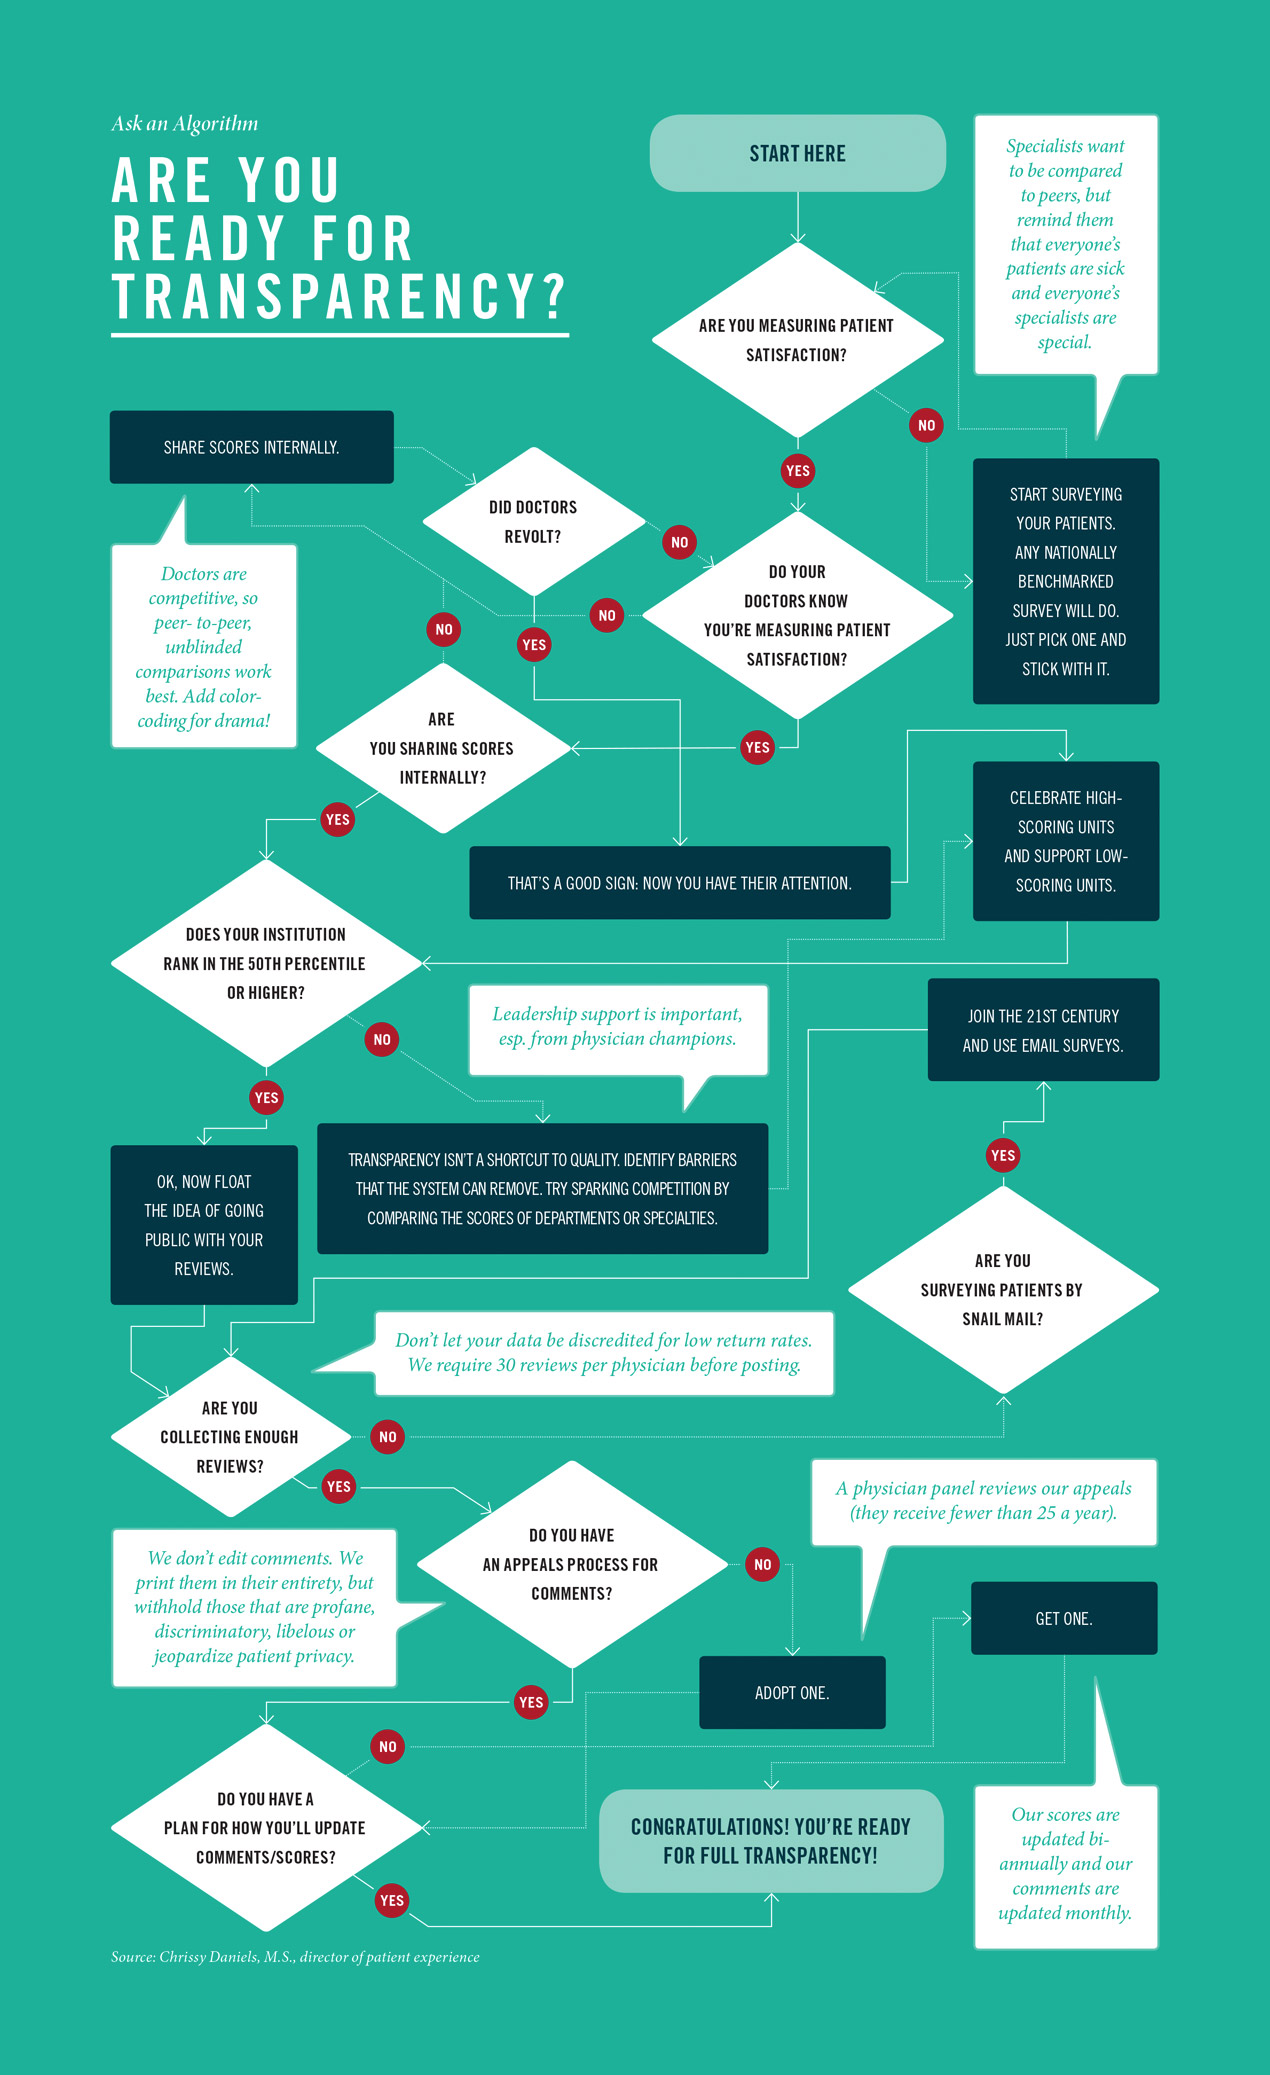 Are You Ready for Transparency? (flowchart)